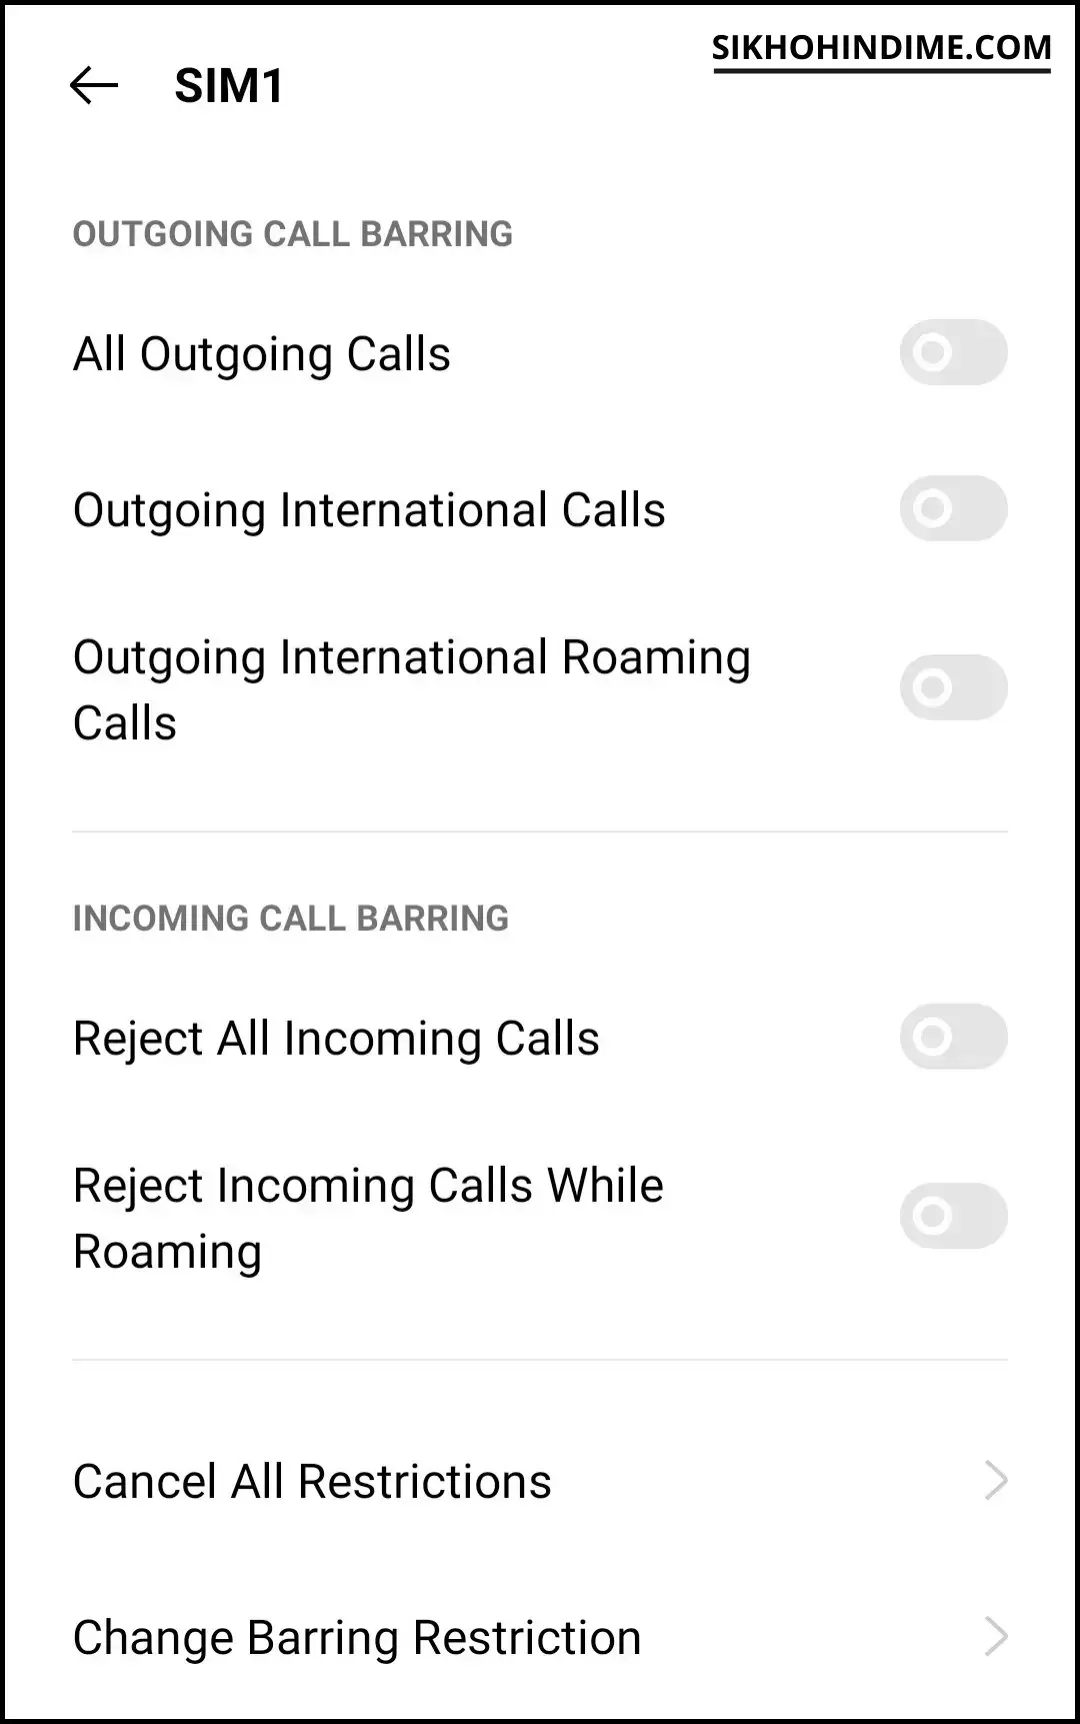 Select call barring type